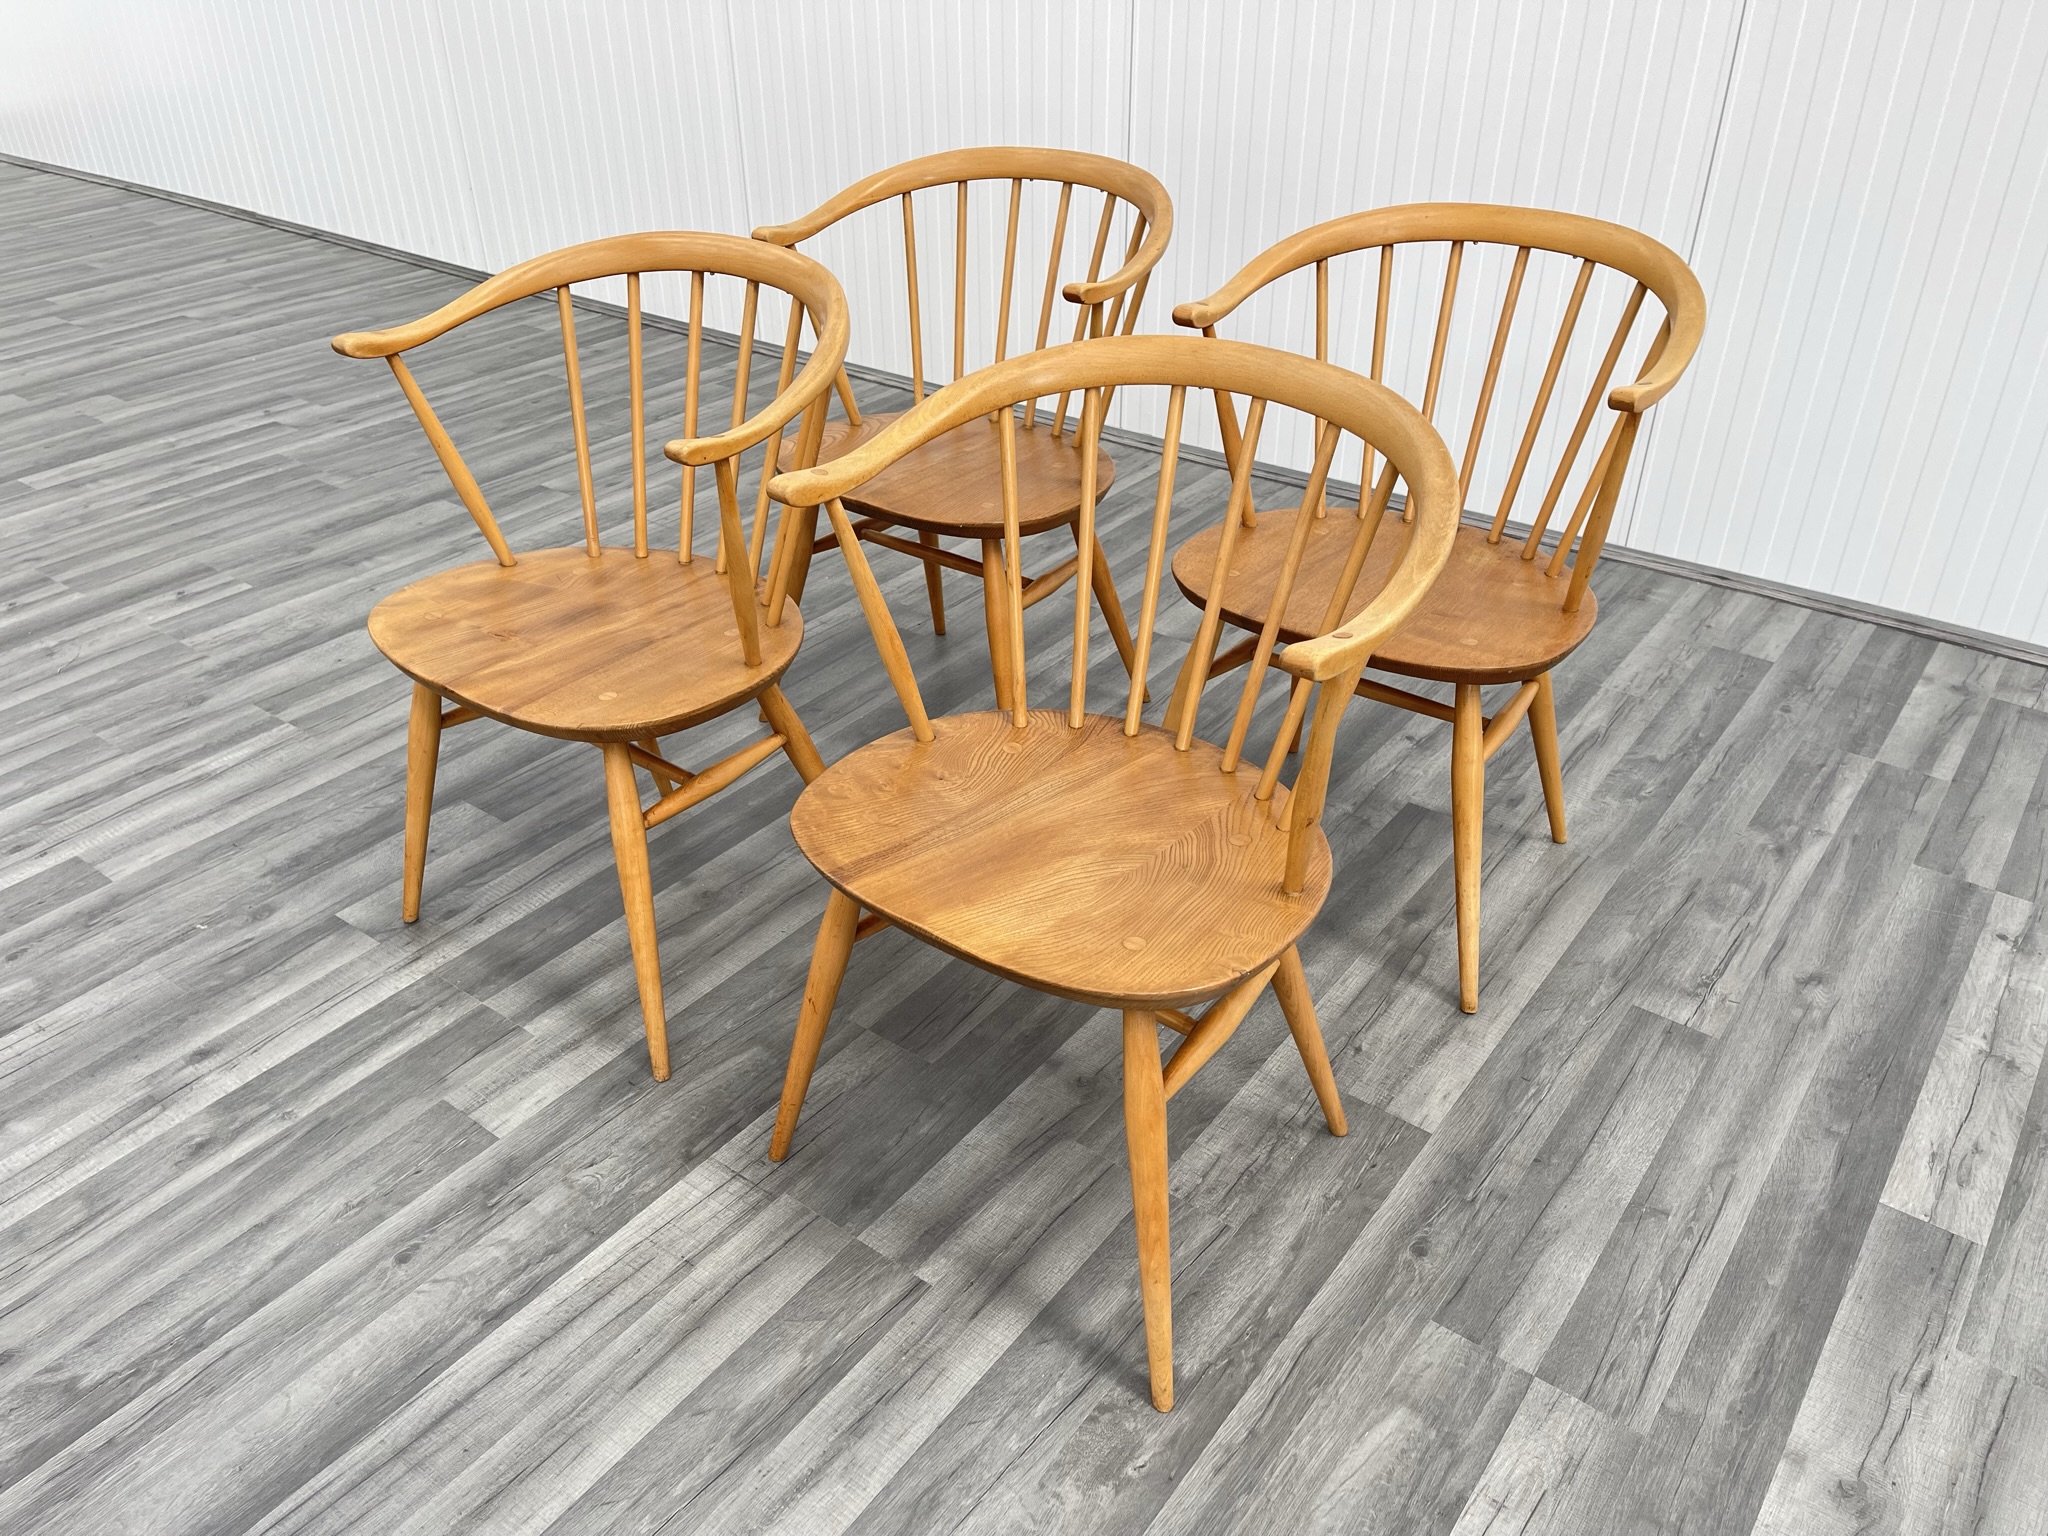 Ercol Furniture : Popular Throughout The 20th Century & Still Loved Today